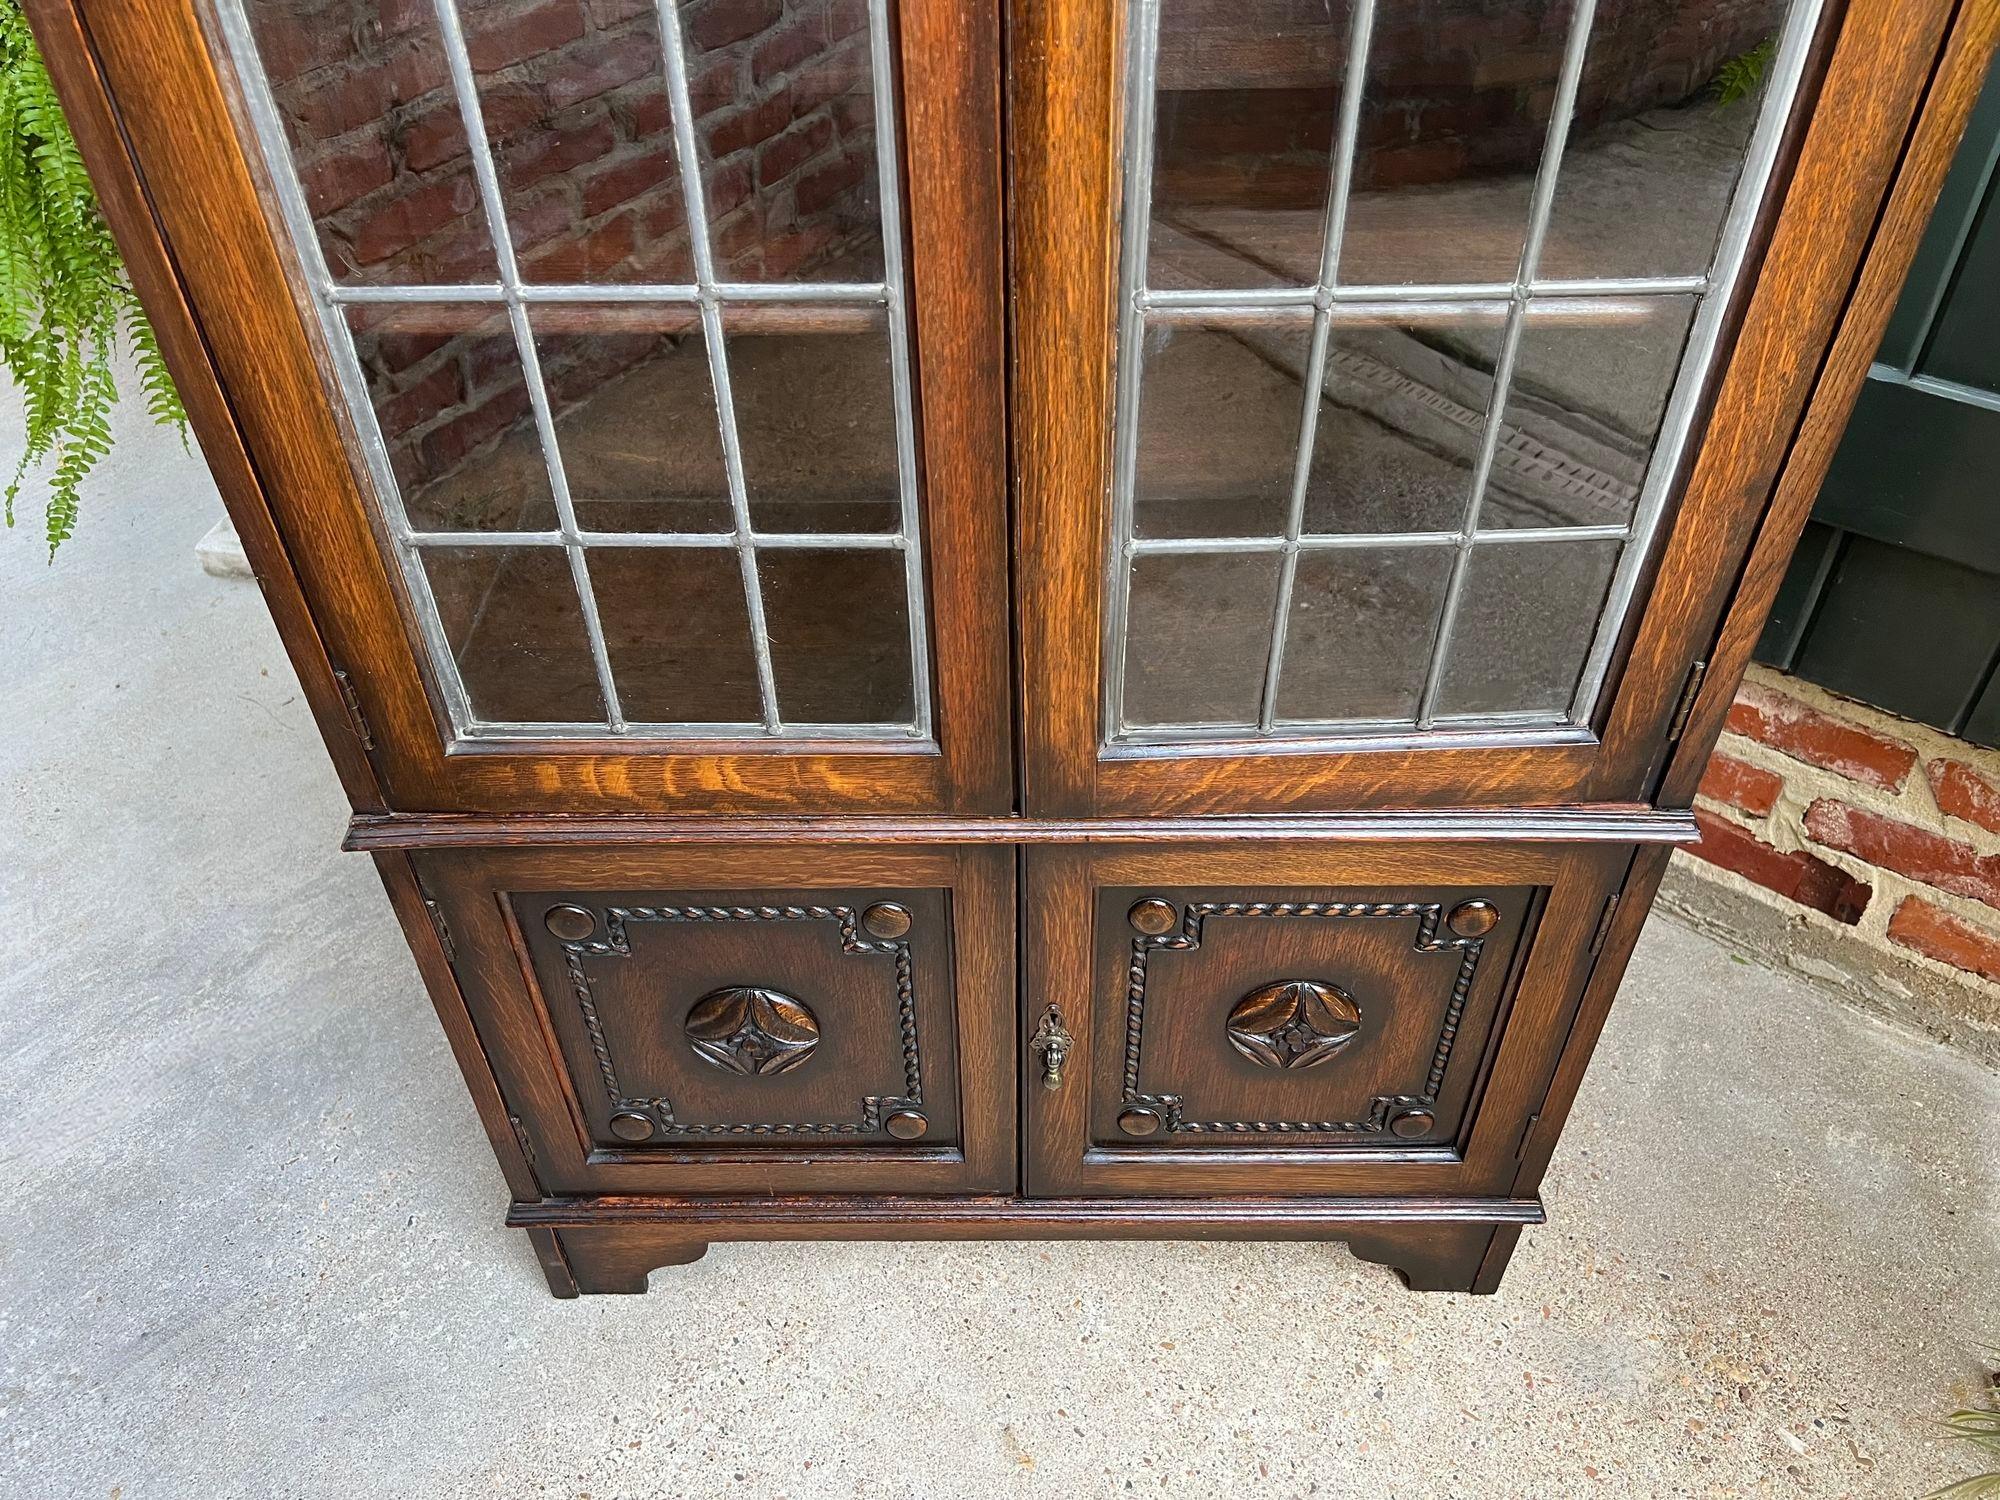 British Antique English Leaded Glass Door Bookcase Display Cabinet Oak Jacobean Dome Top